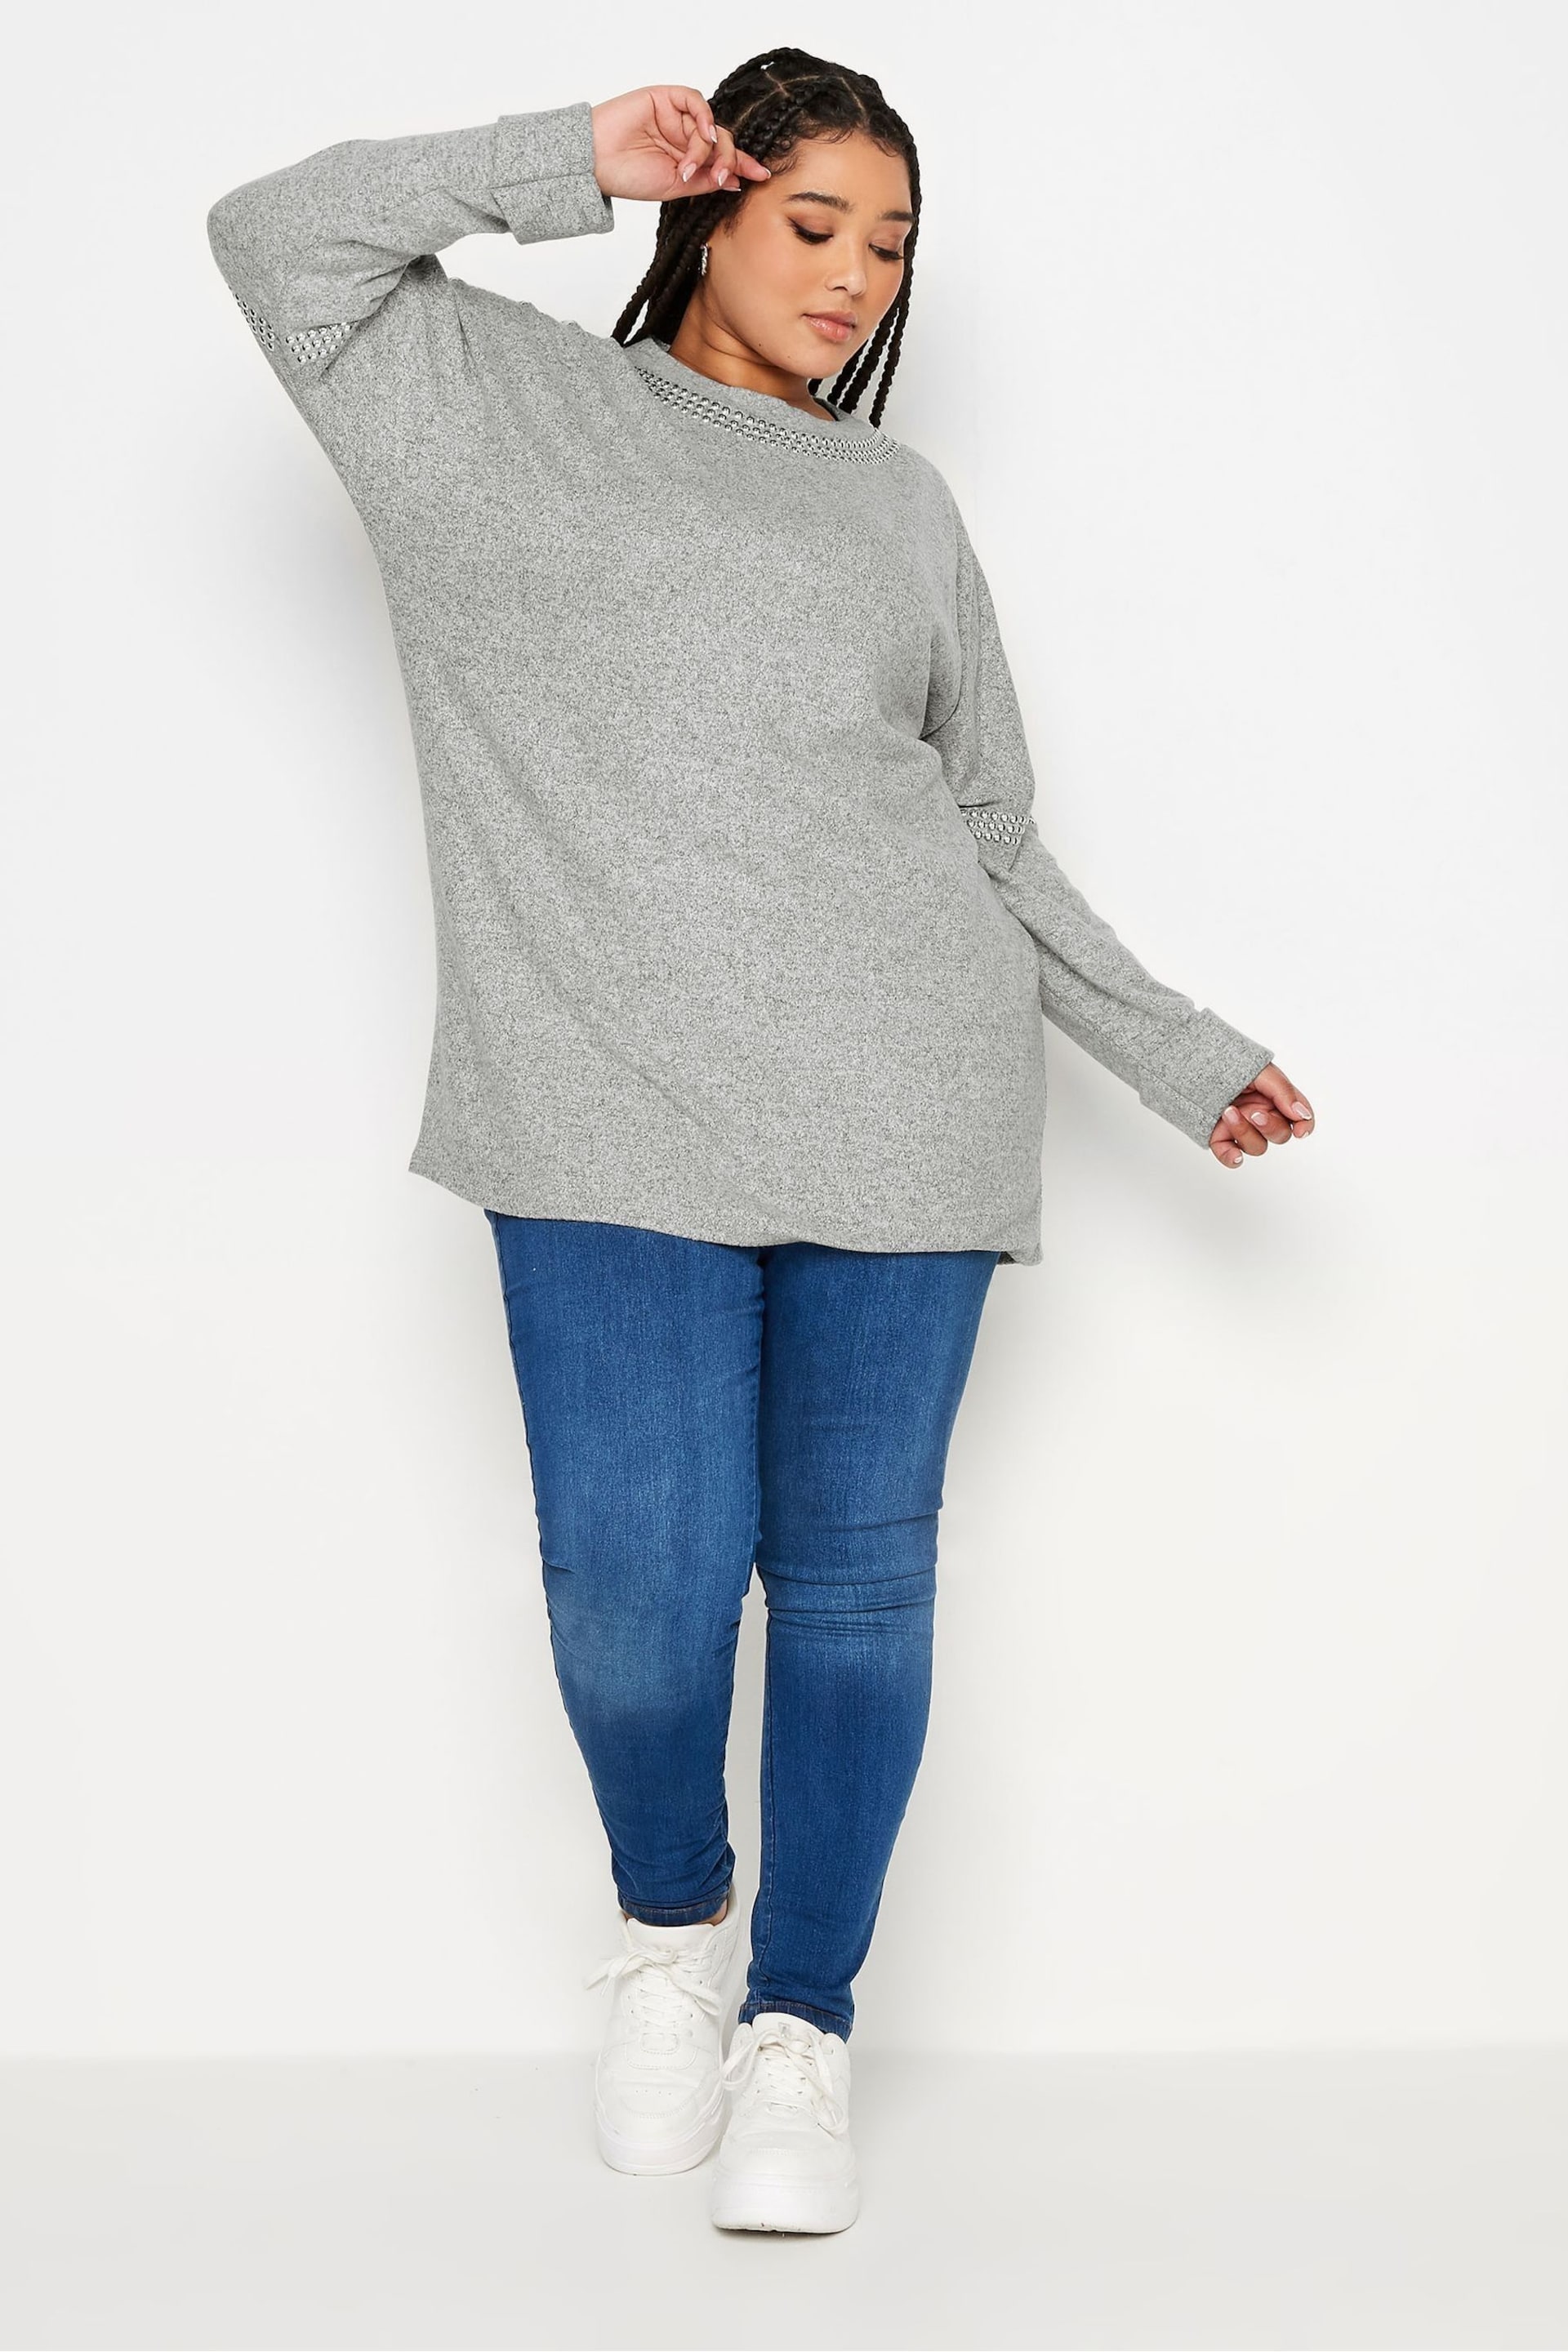 Yours Curve Grey Studded Batwing Jumper - Image 3 of 4